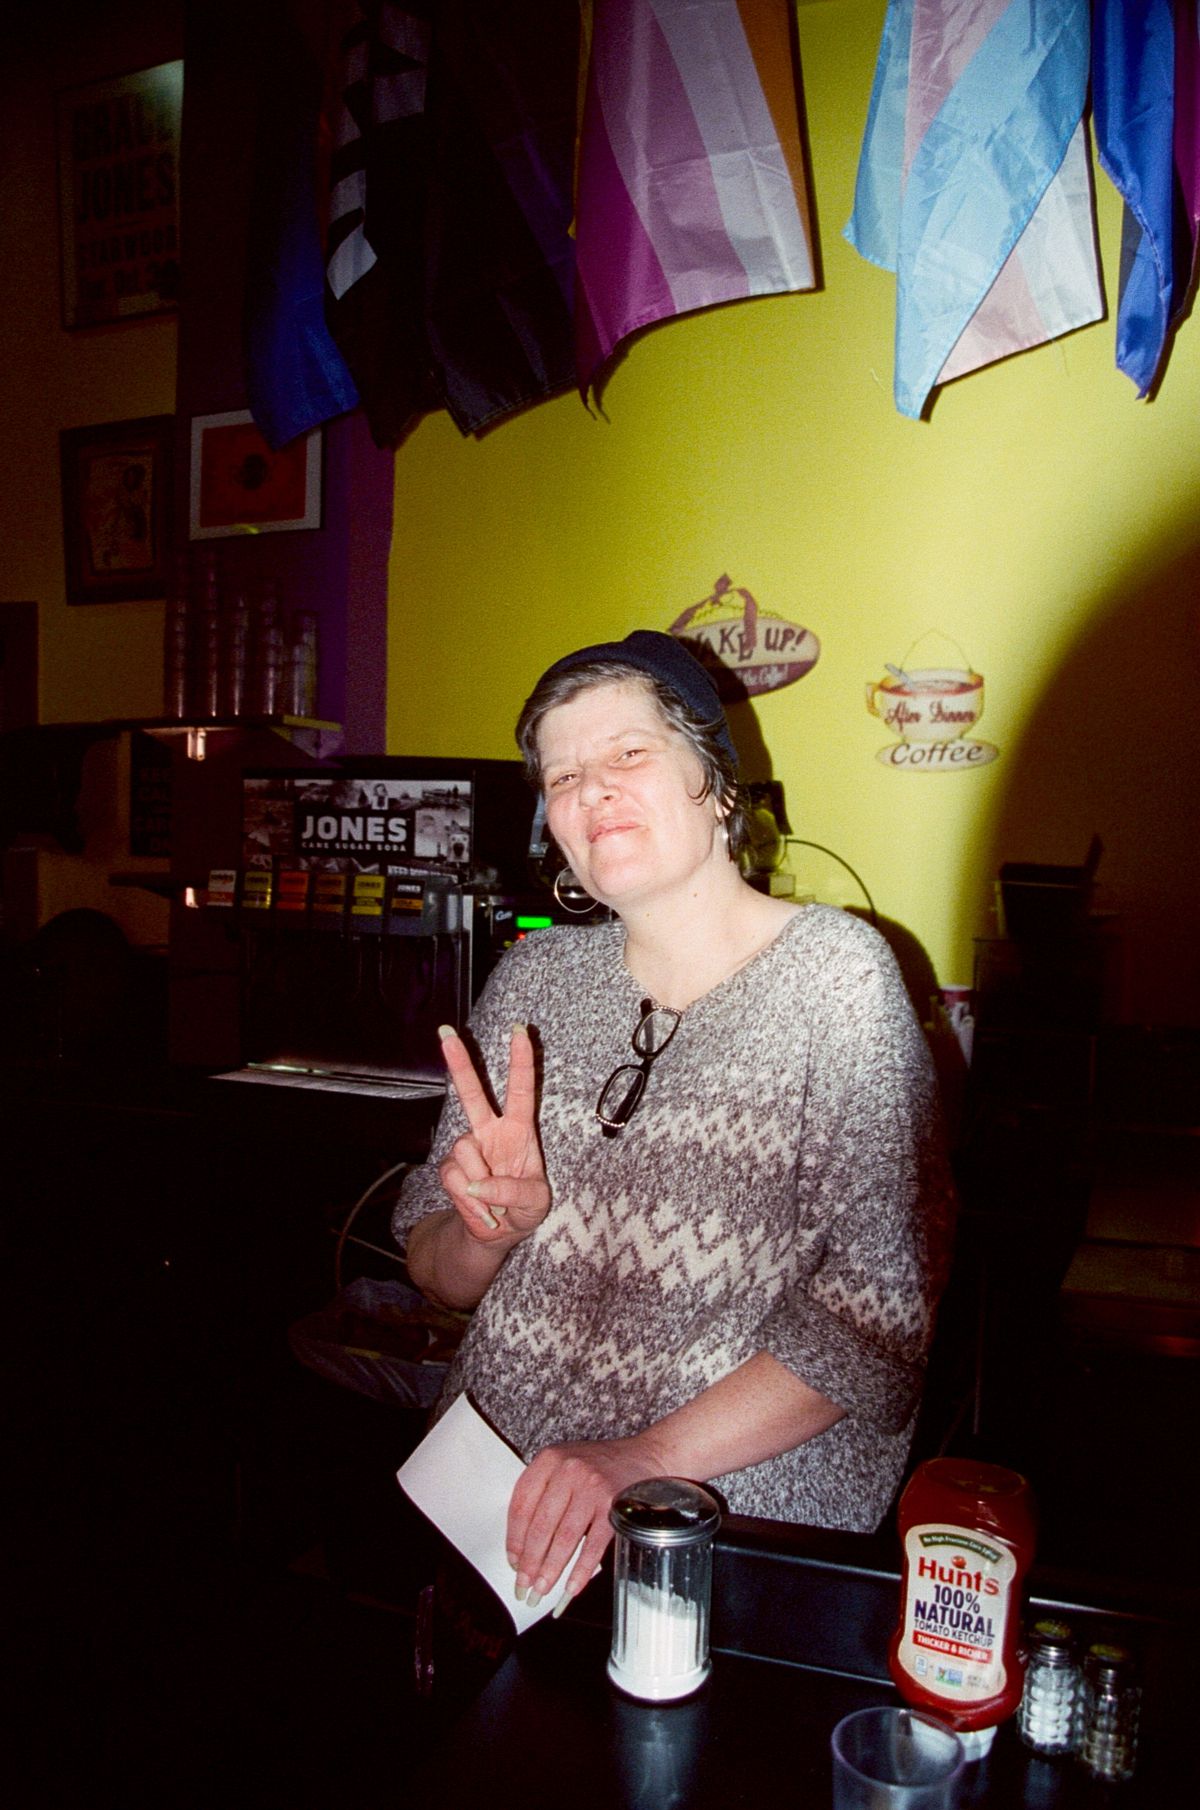 A person with short wavy hair flashes a peace sign, sitting at the counter at the Roxy.